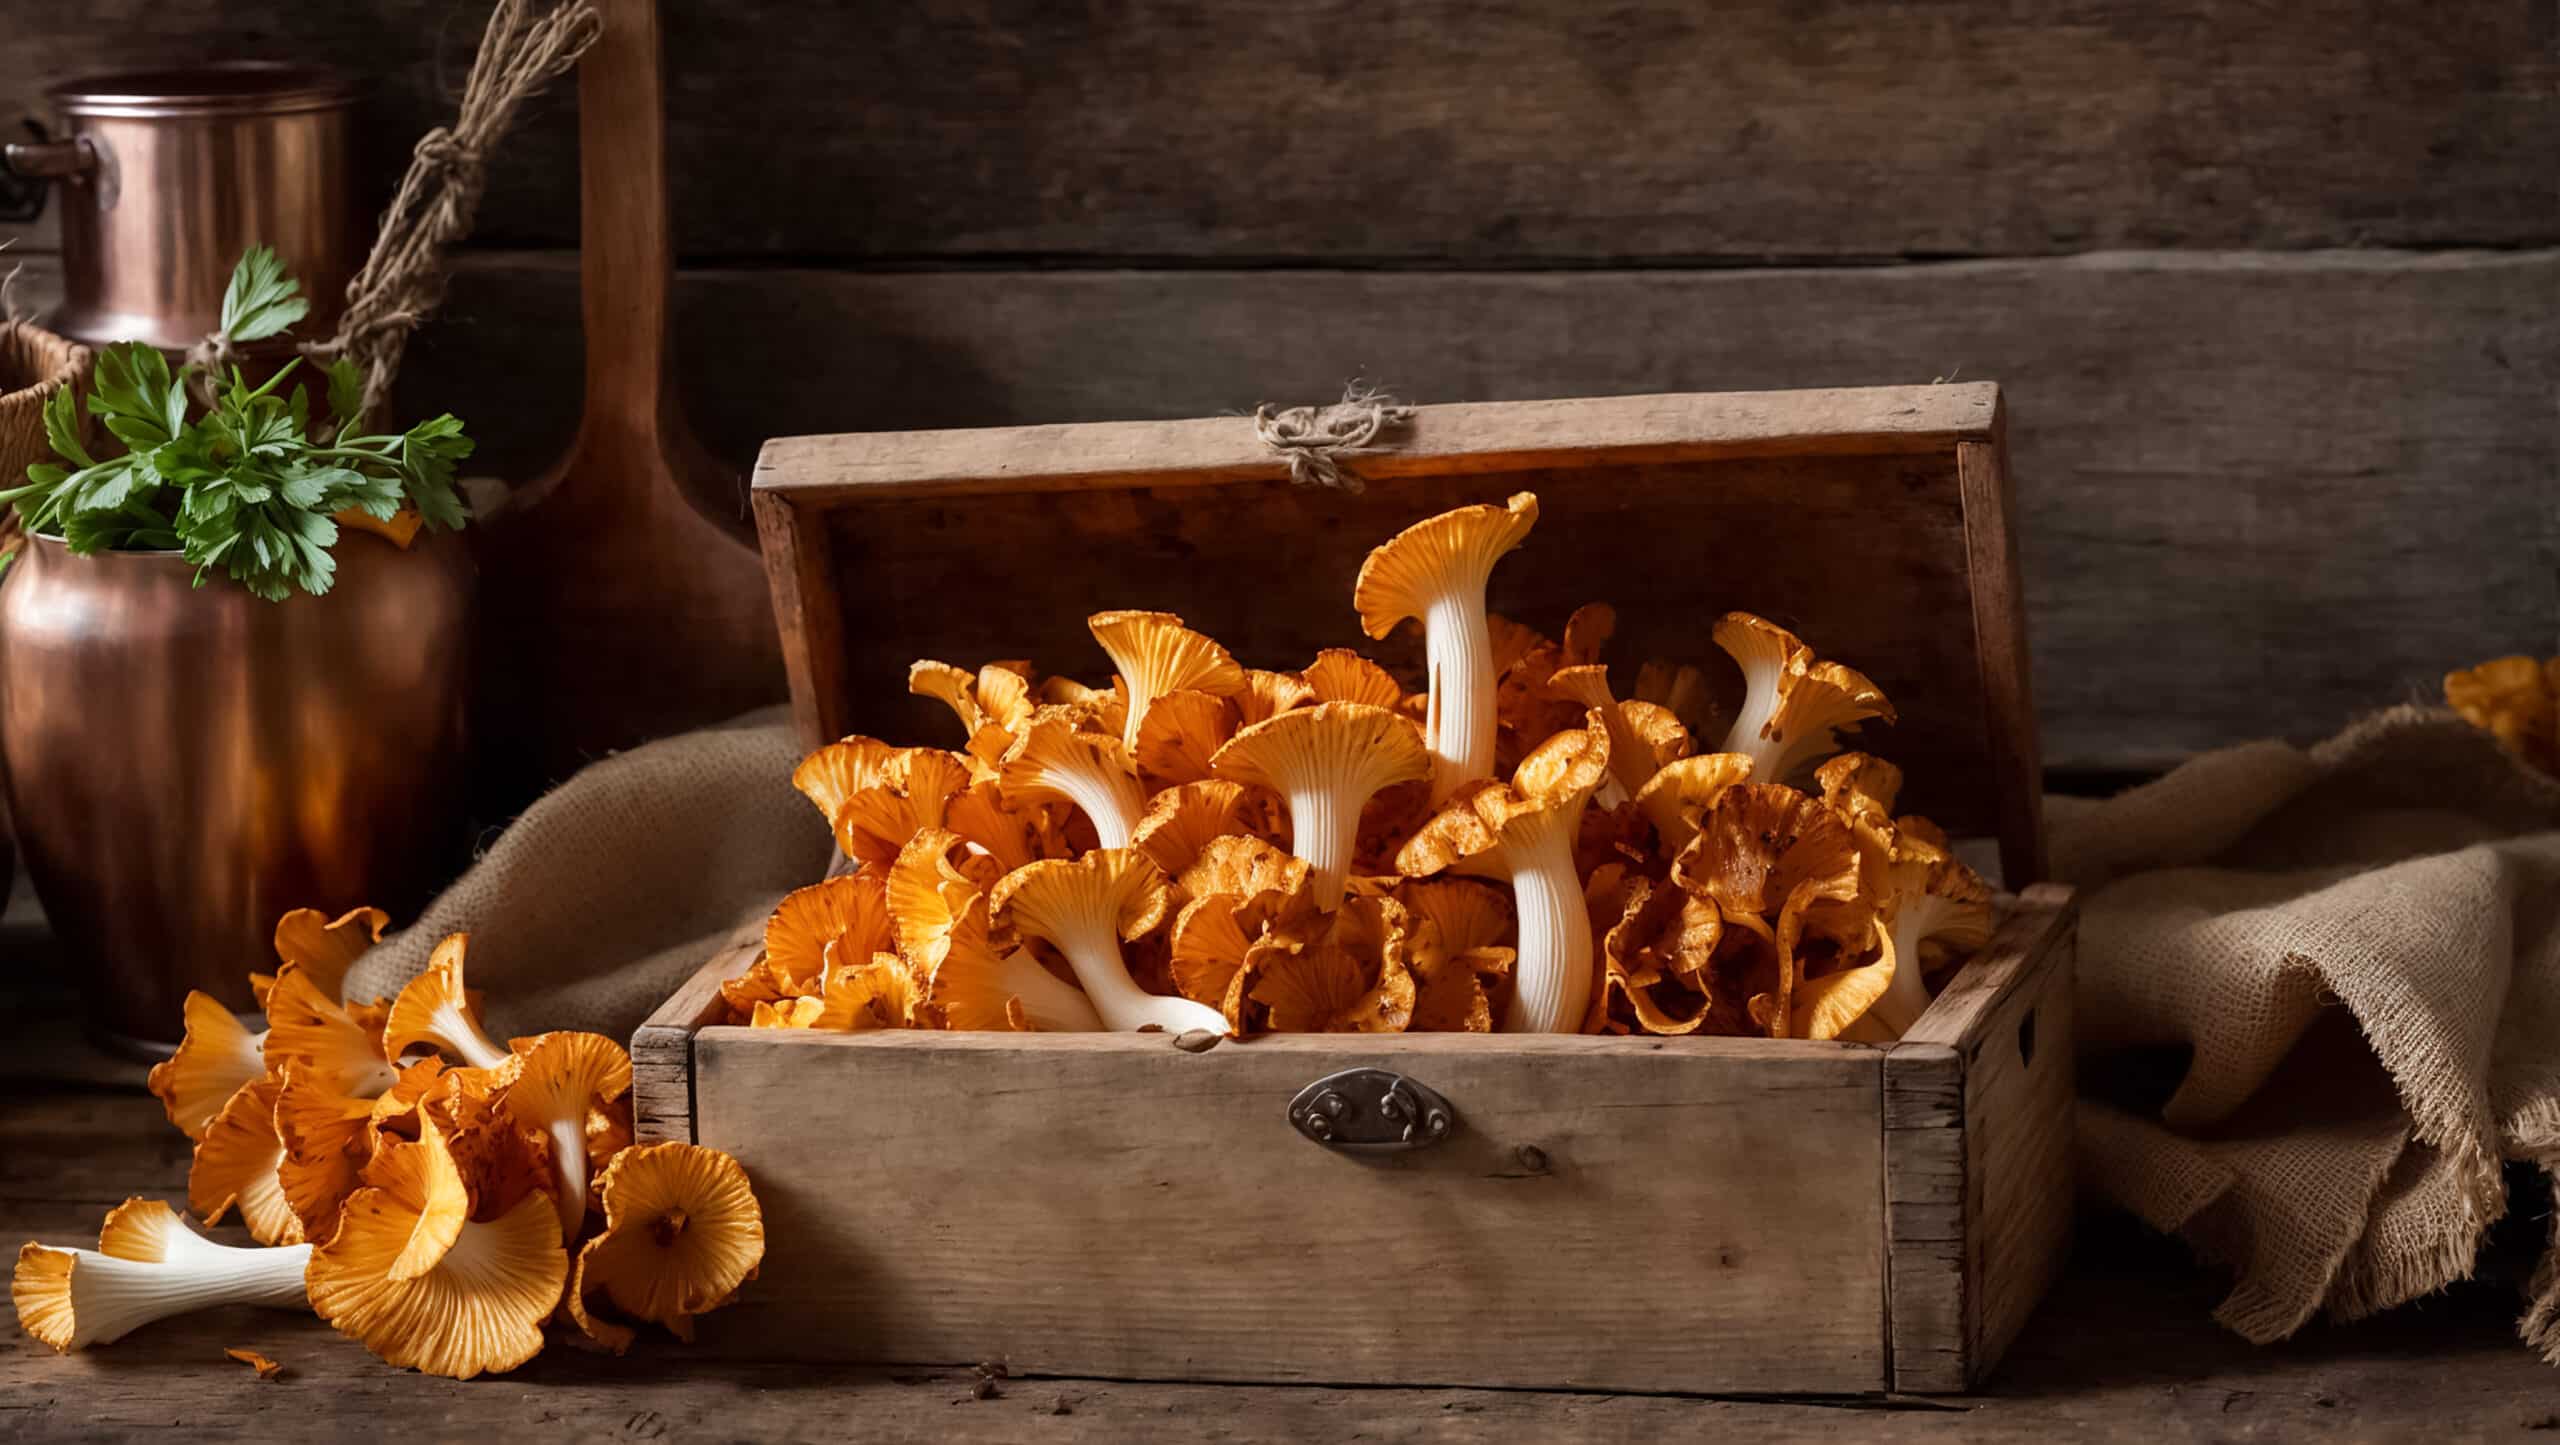 growmyownhealthfood.com : How much does chicken of the woods sell for?